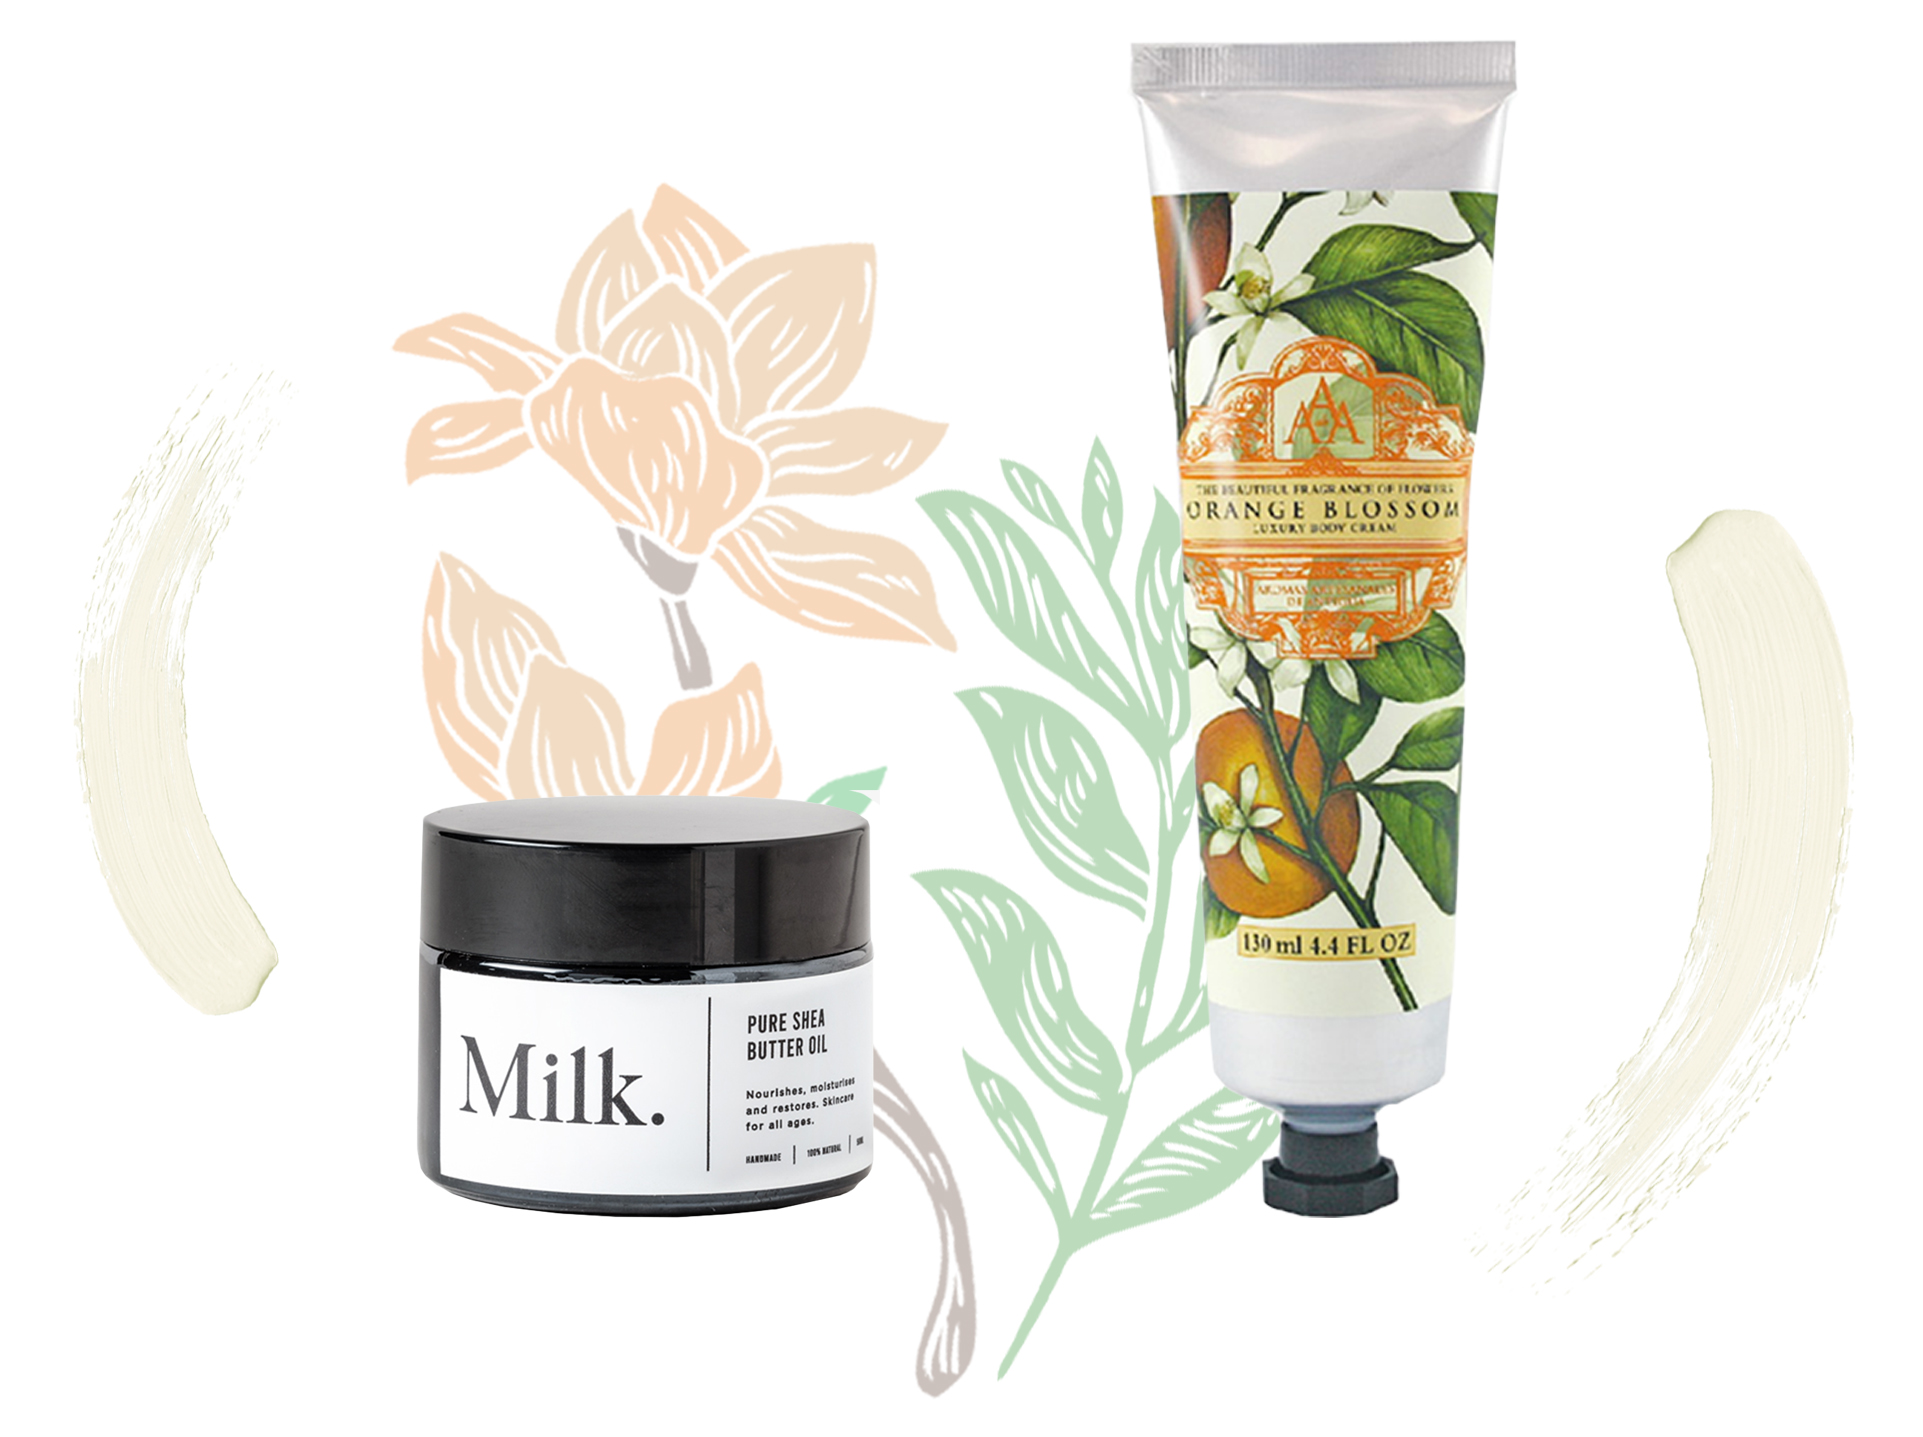 Pure Shea Butter Oil and Orange Blossom Body Cream with floral decoration in orange and green